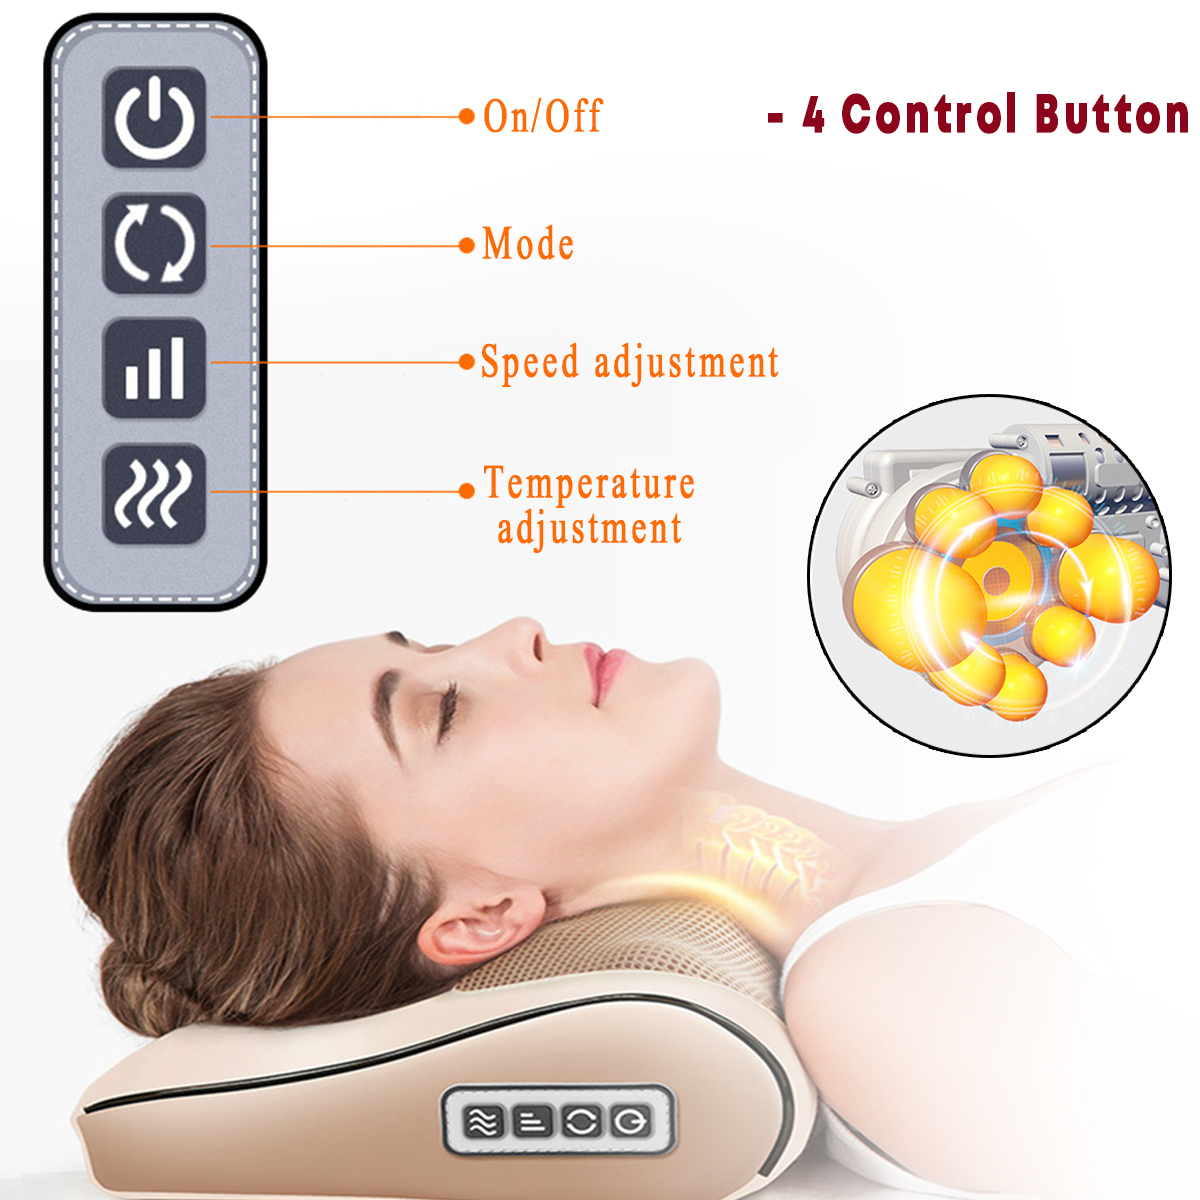 Electric-Massage-Pillow-Infrared-Heating-Neck-Shoulder-Back-Body-Massager-Device-1567188-4